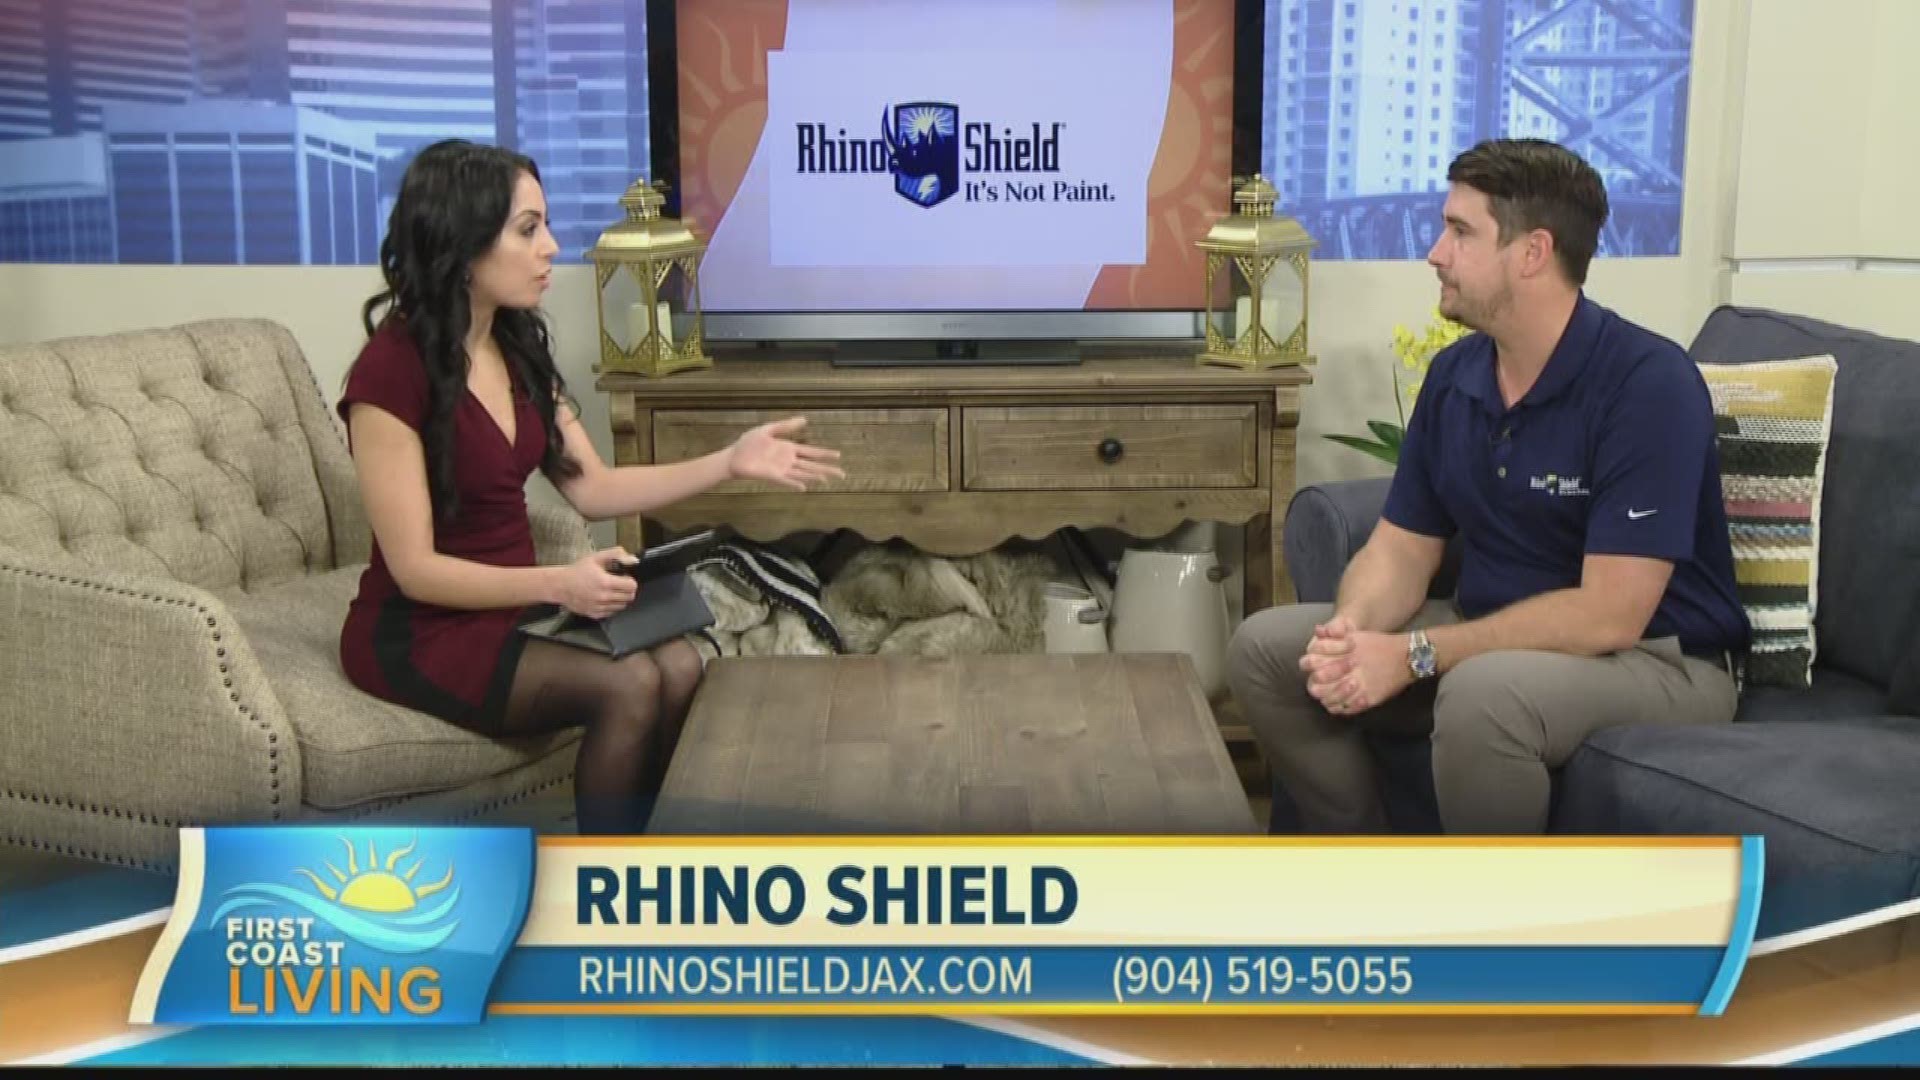 Rhino Shield can help take all the work out of revamping the look of your home without breaking the bank.